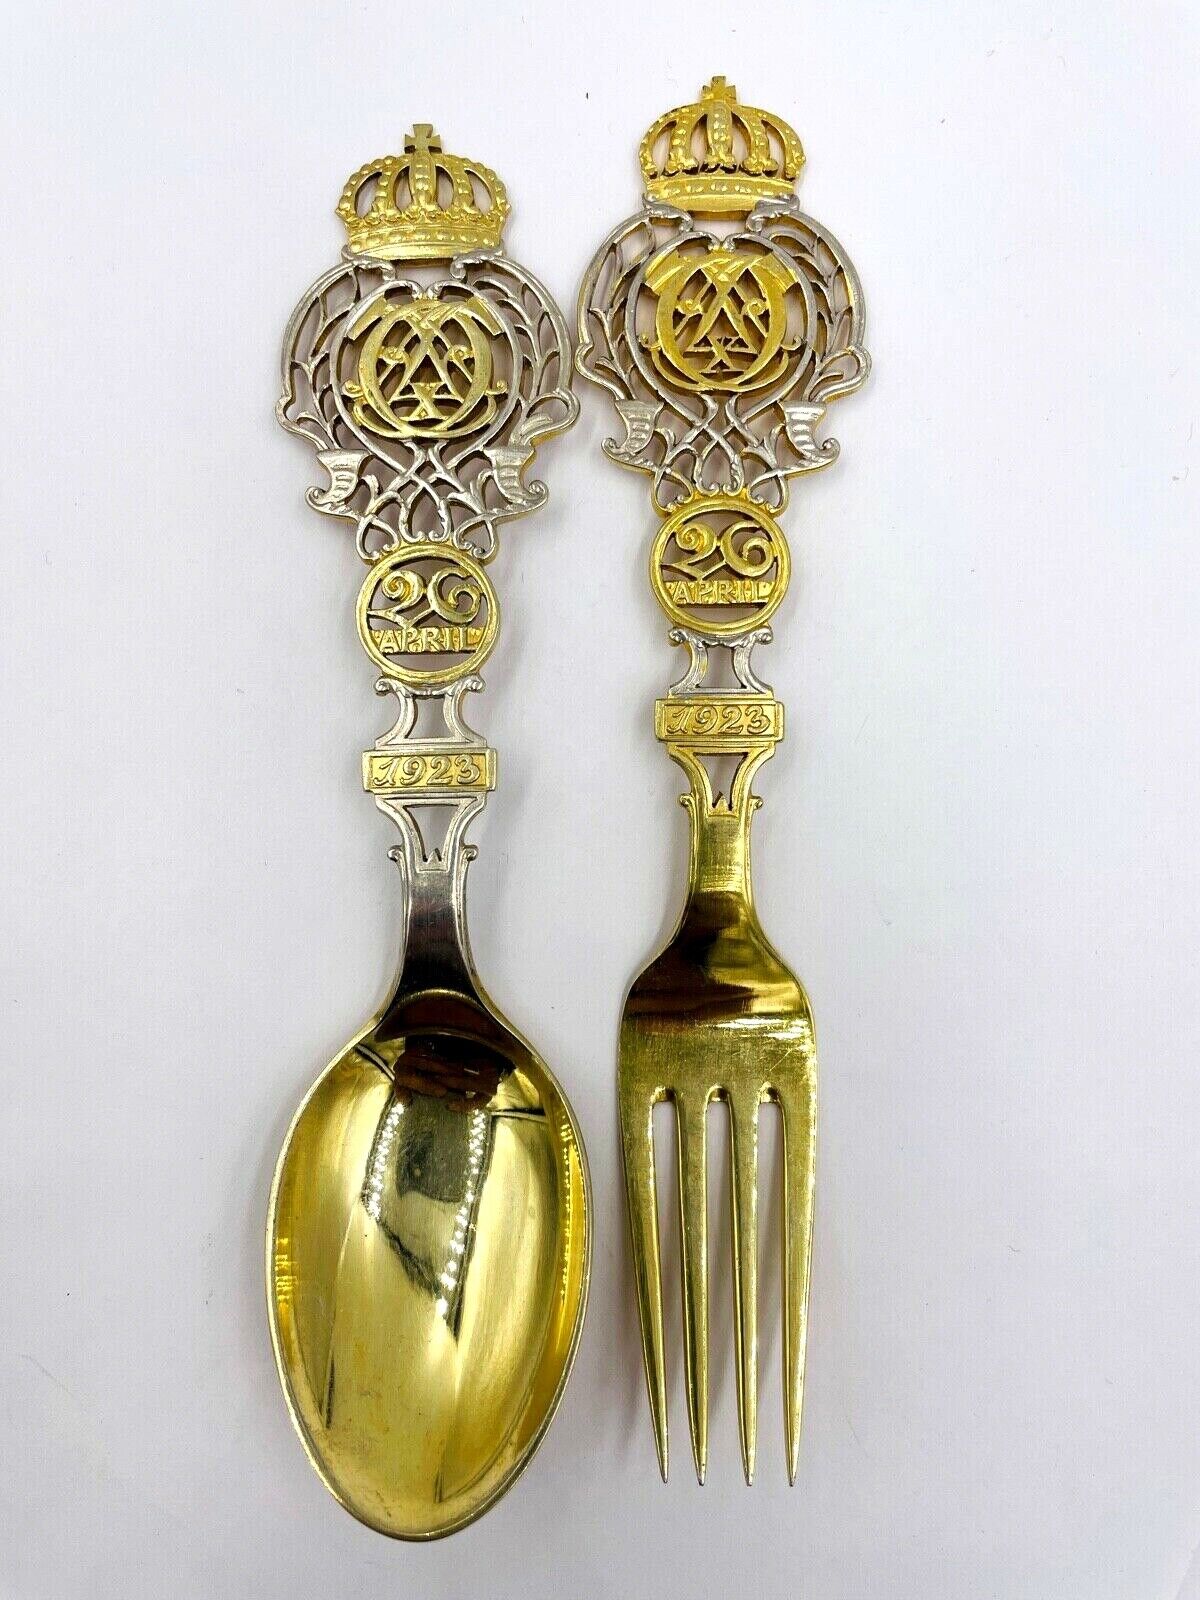 A. Michelsen 1923 commemorative fork and spoon set gilded Rare set